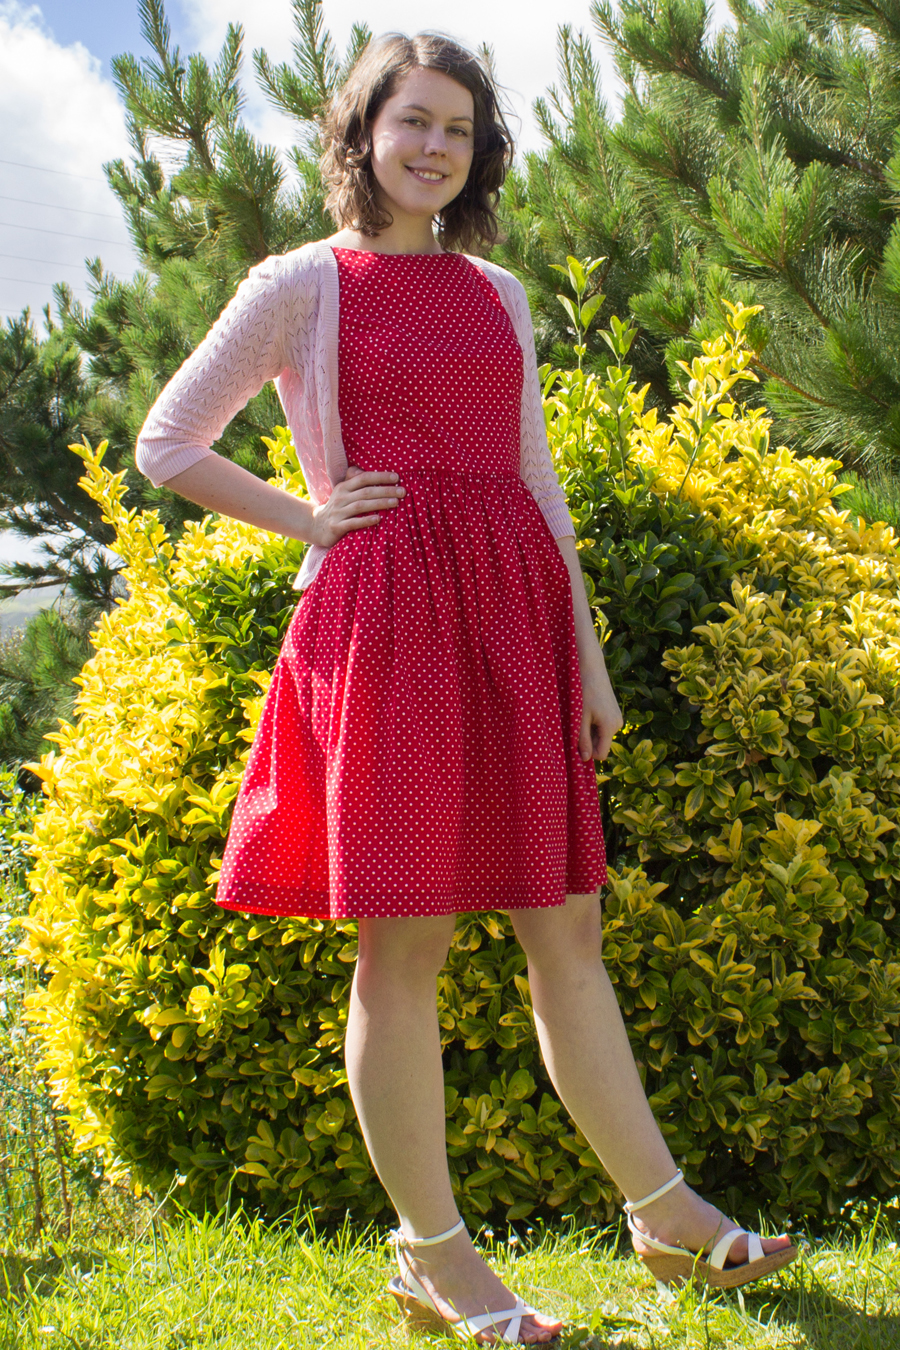 Butterick 4443 in polka dots! – Sewing Projects | BurdaStyle.com